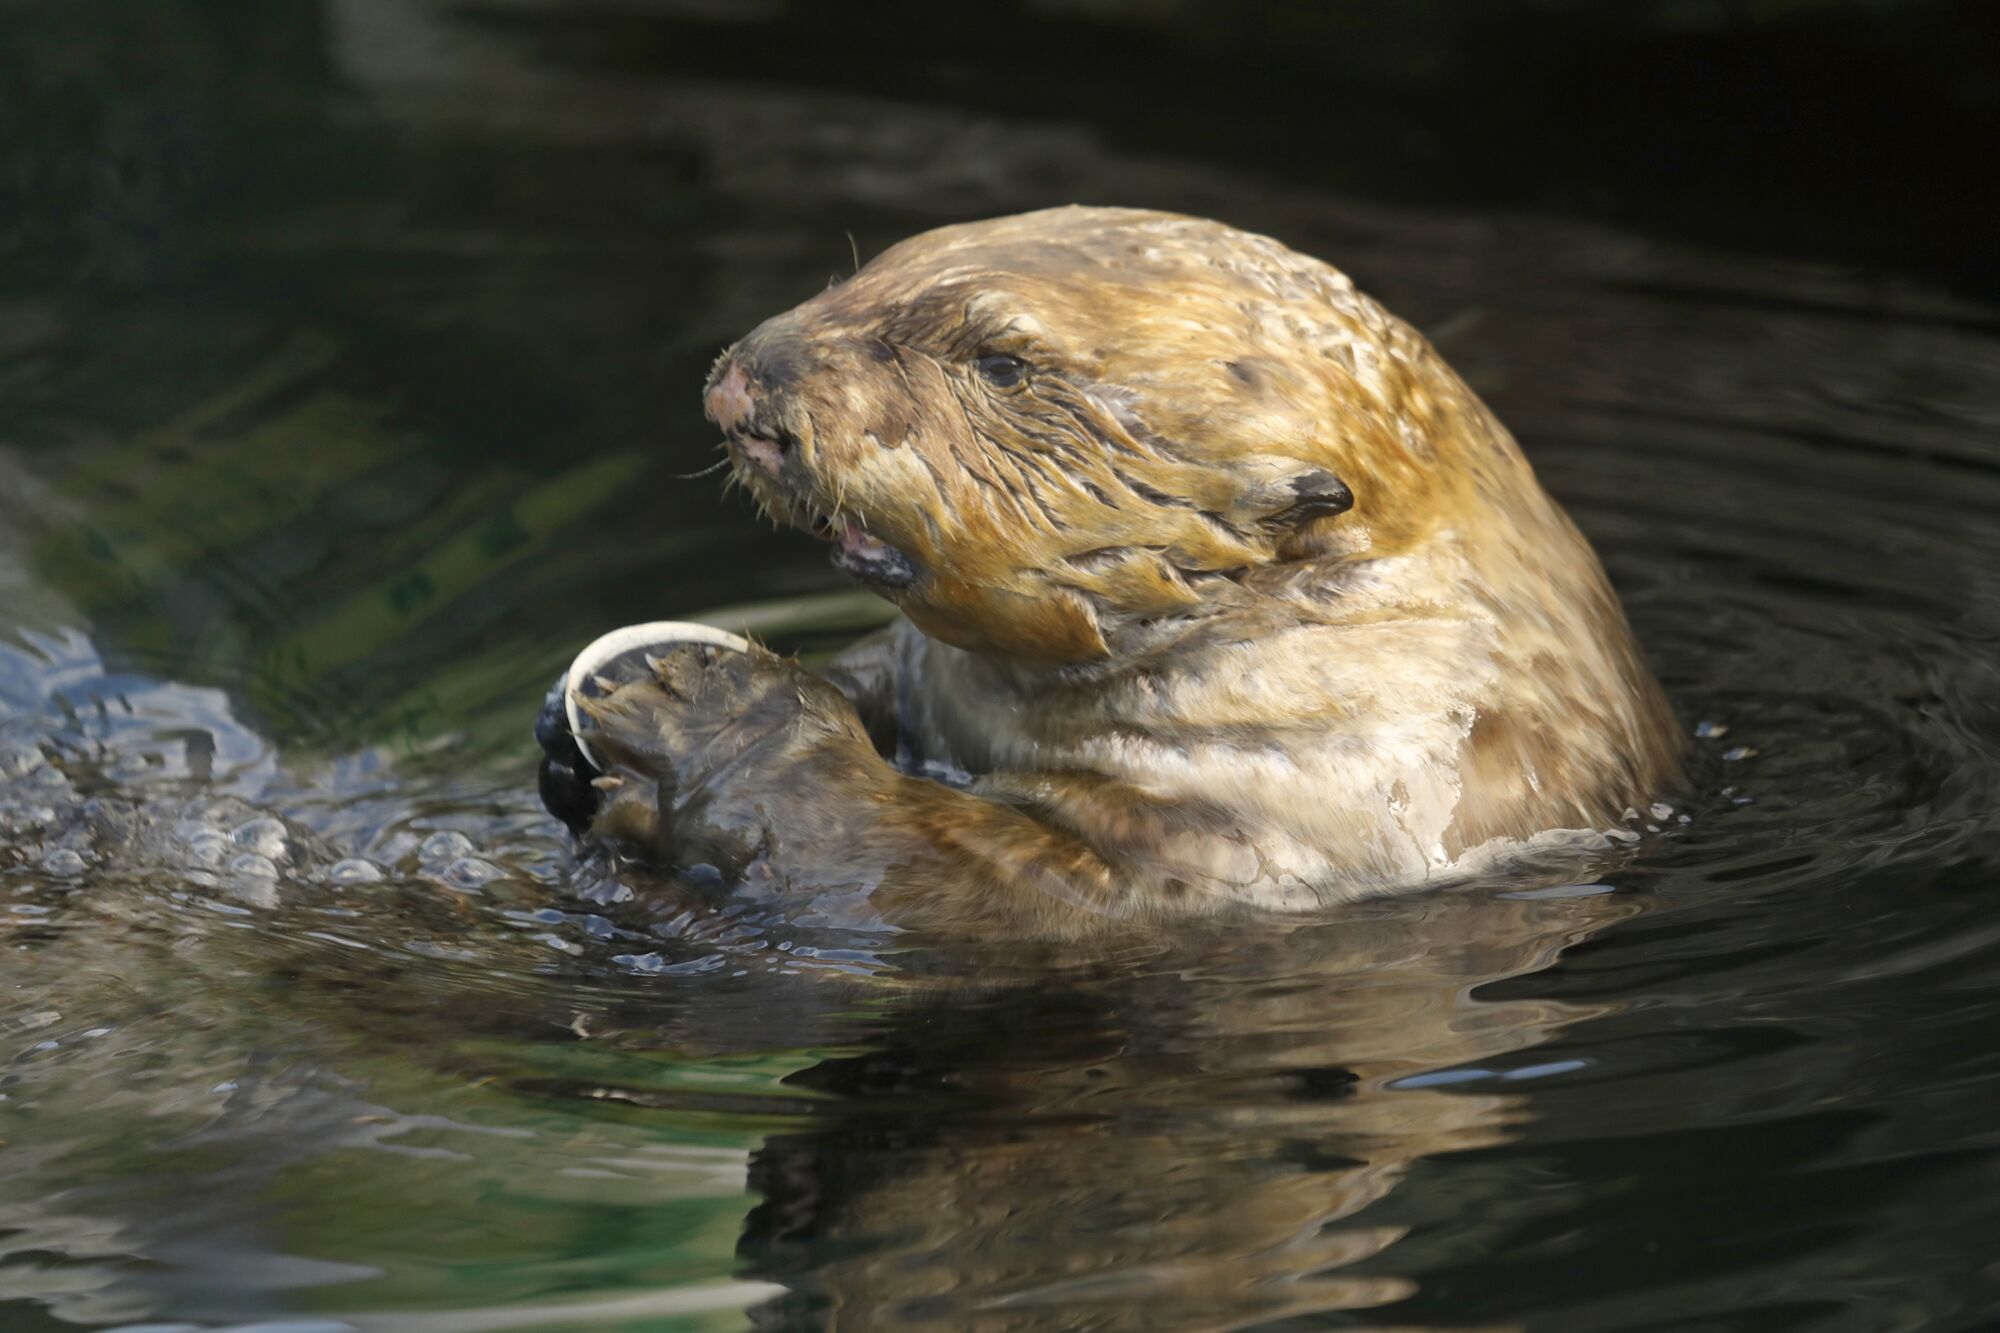 A sea otter in the water eating shellfish 